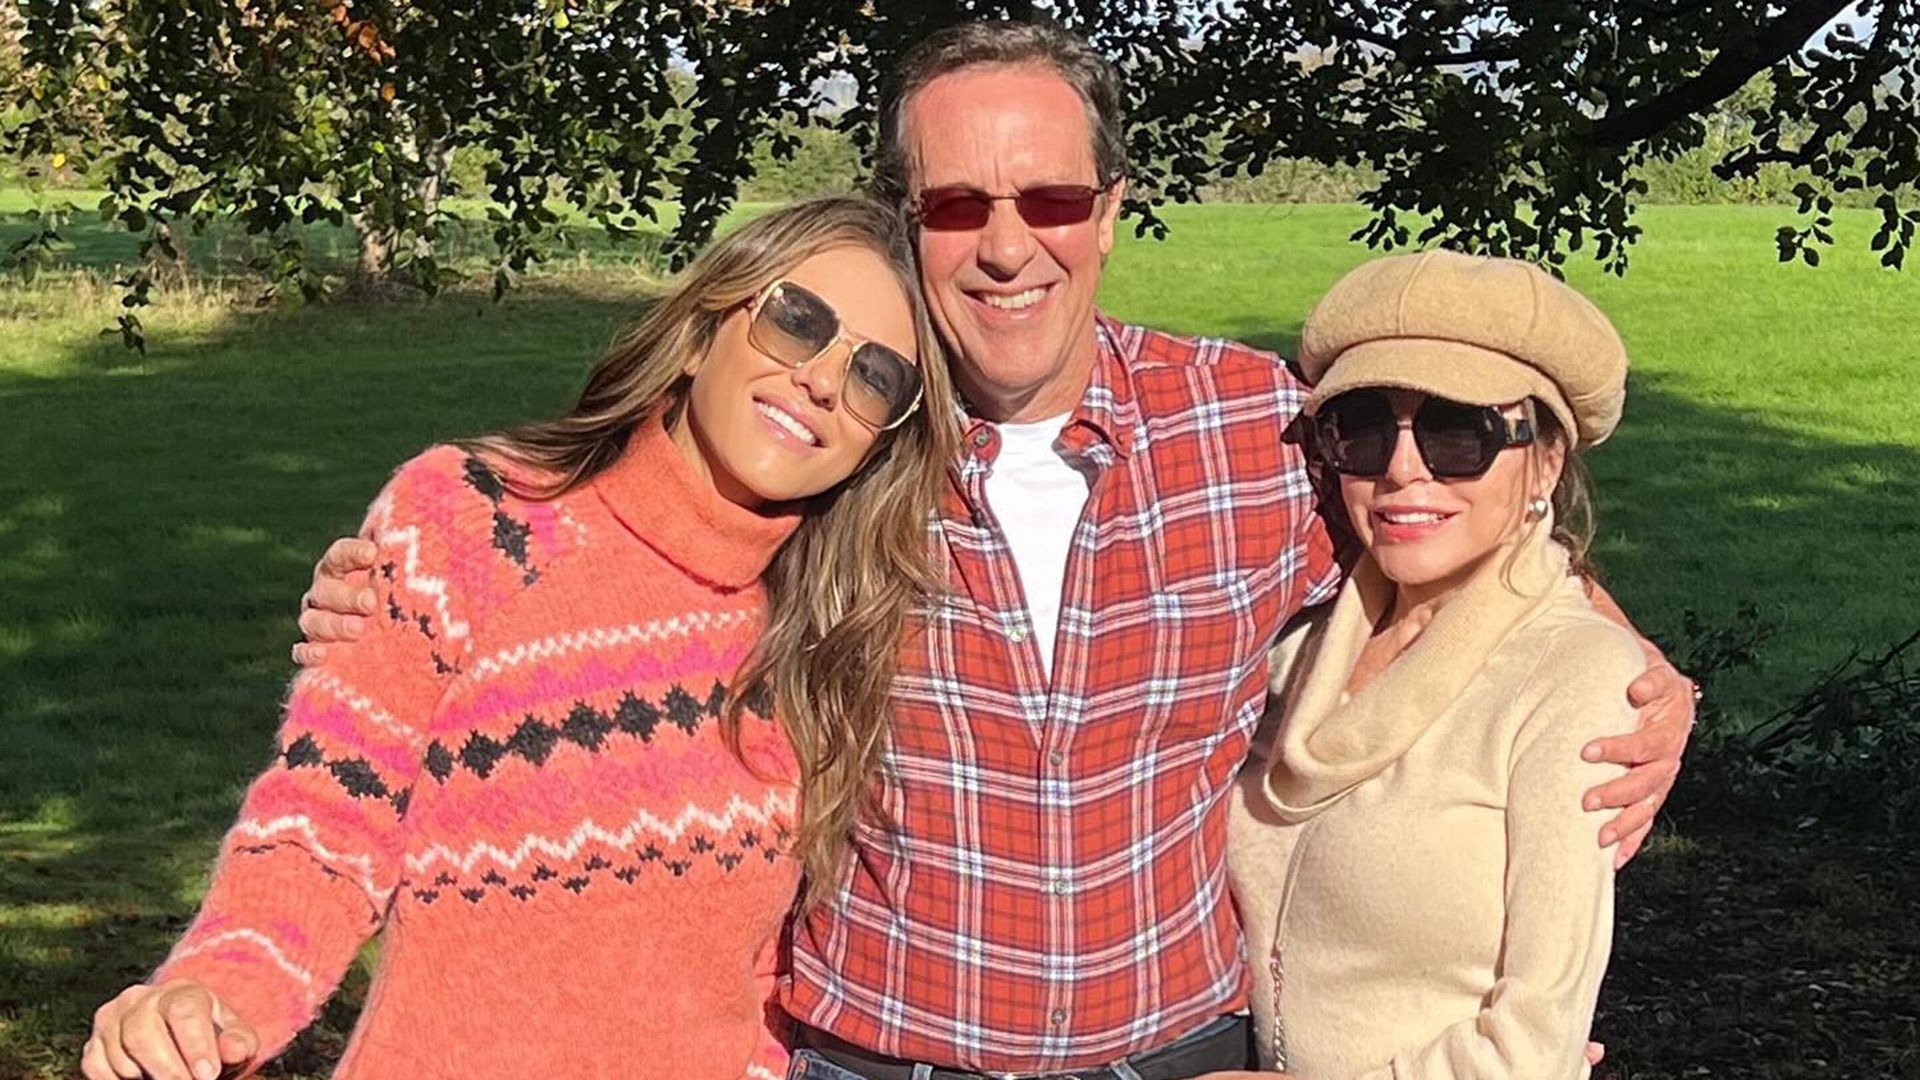 Elizabeth Hurley, Percy Gibson and Joan Collins on a walk in the country